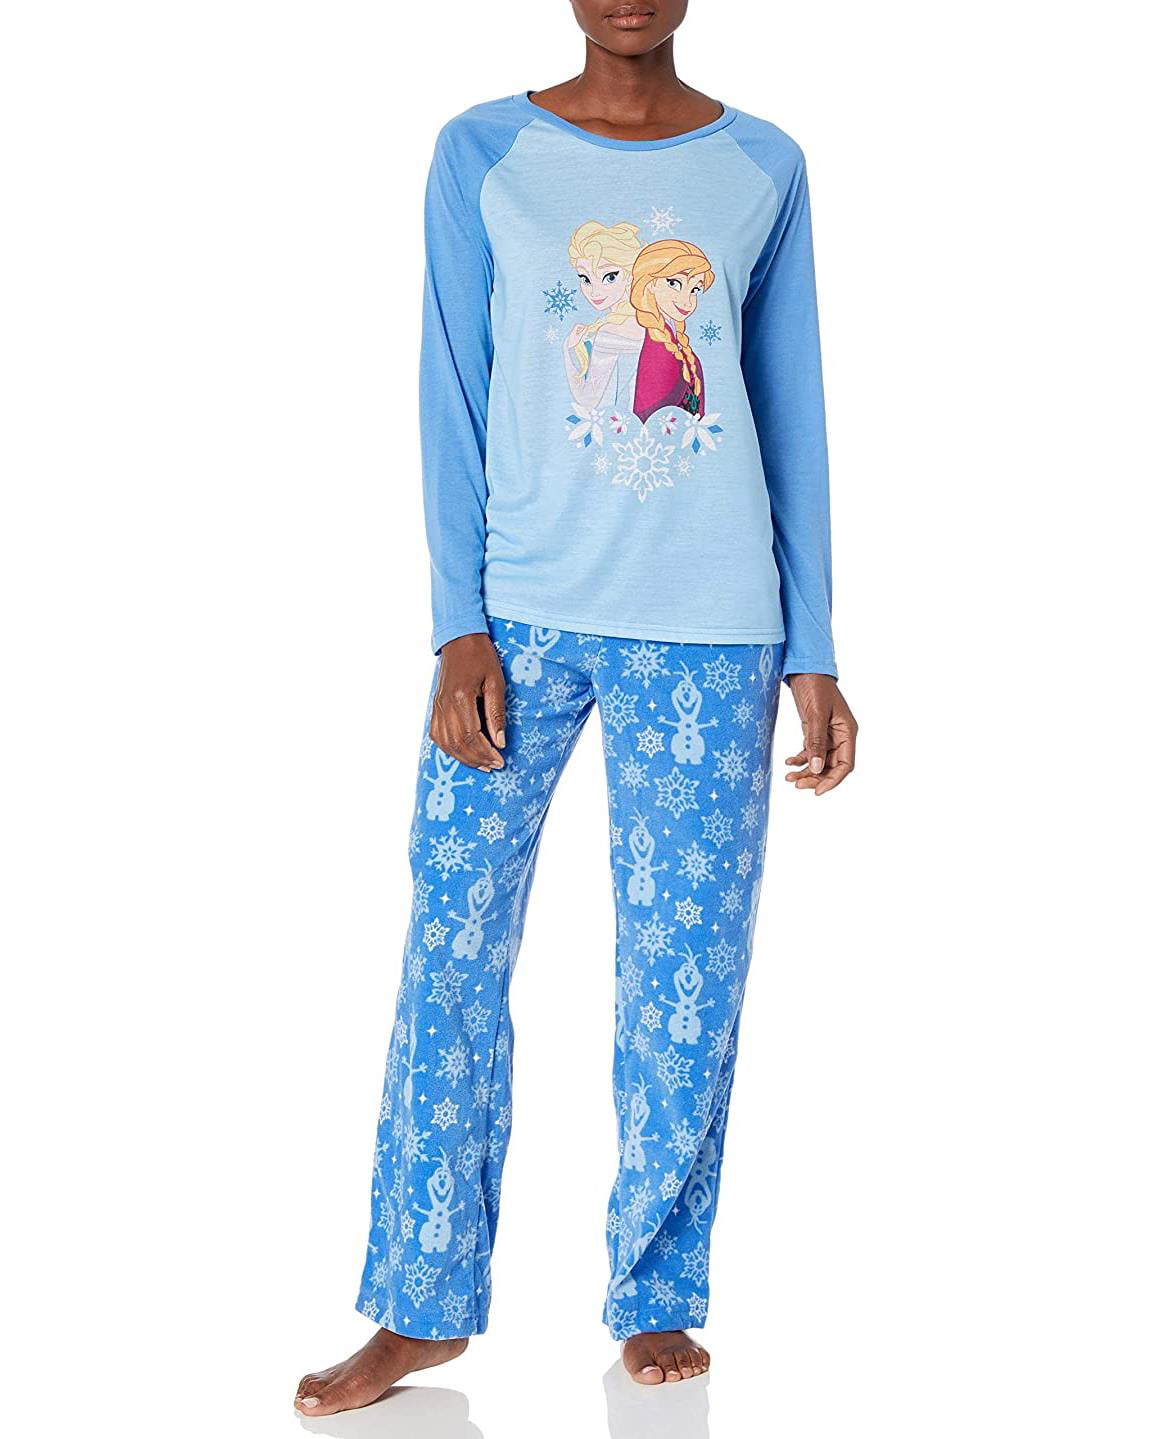 Details about   Womens Briefly Stated Frozen 2 Stronger Together Fleece Pajamas Sleep Set NWT